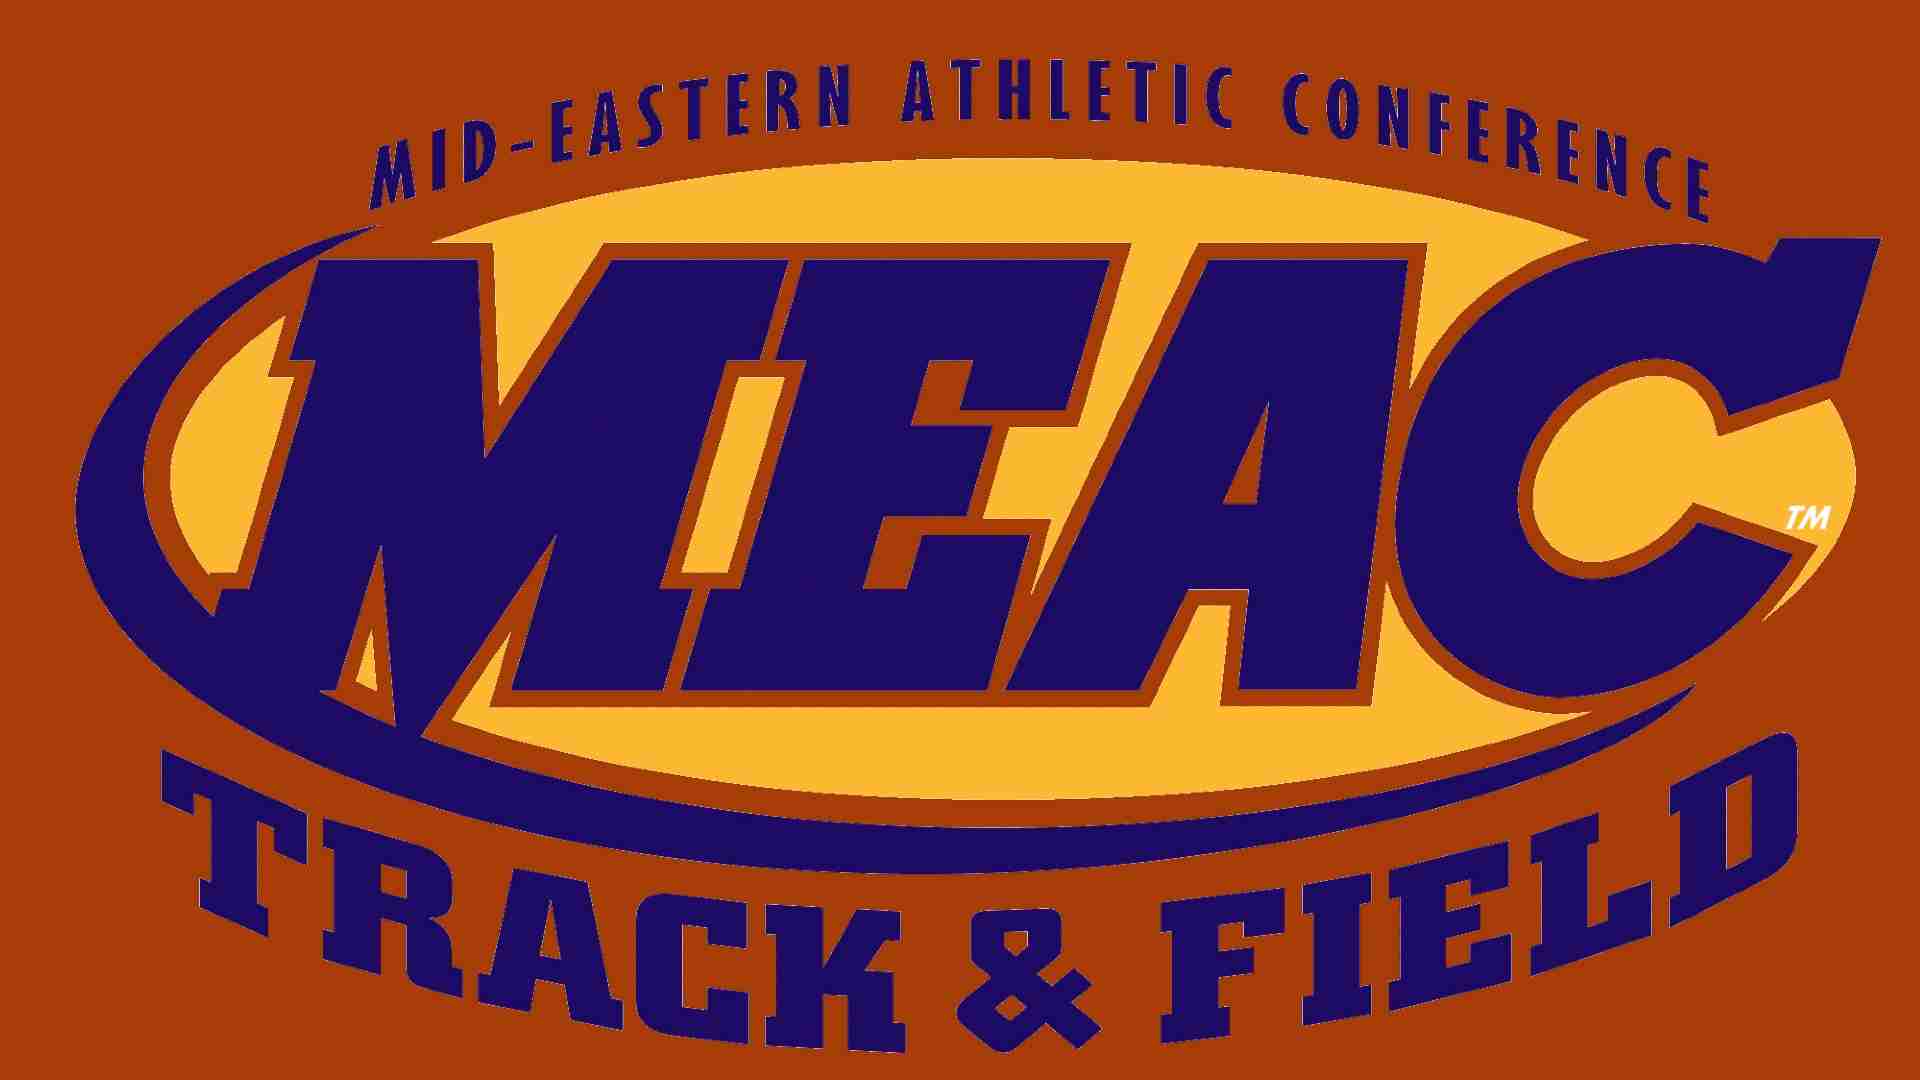 How-to-watch-the-2022-MEAC-Indoor-Championships